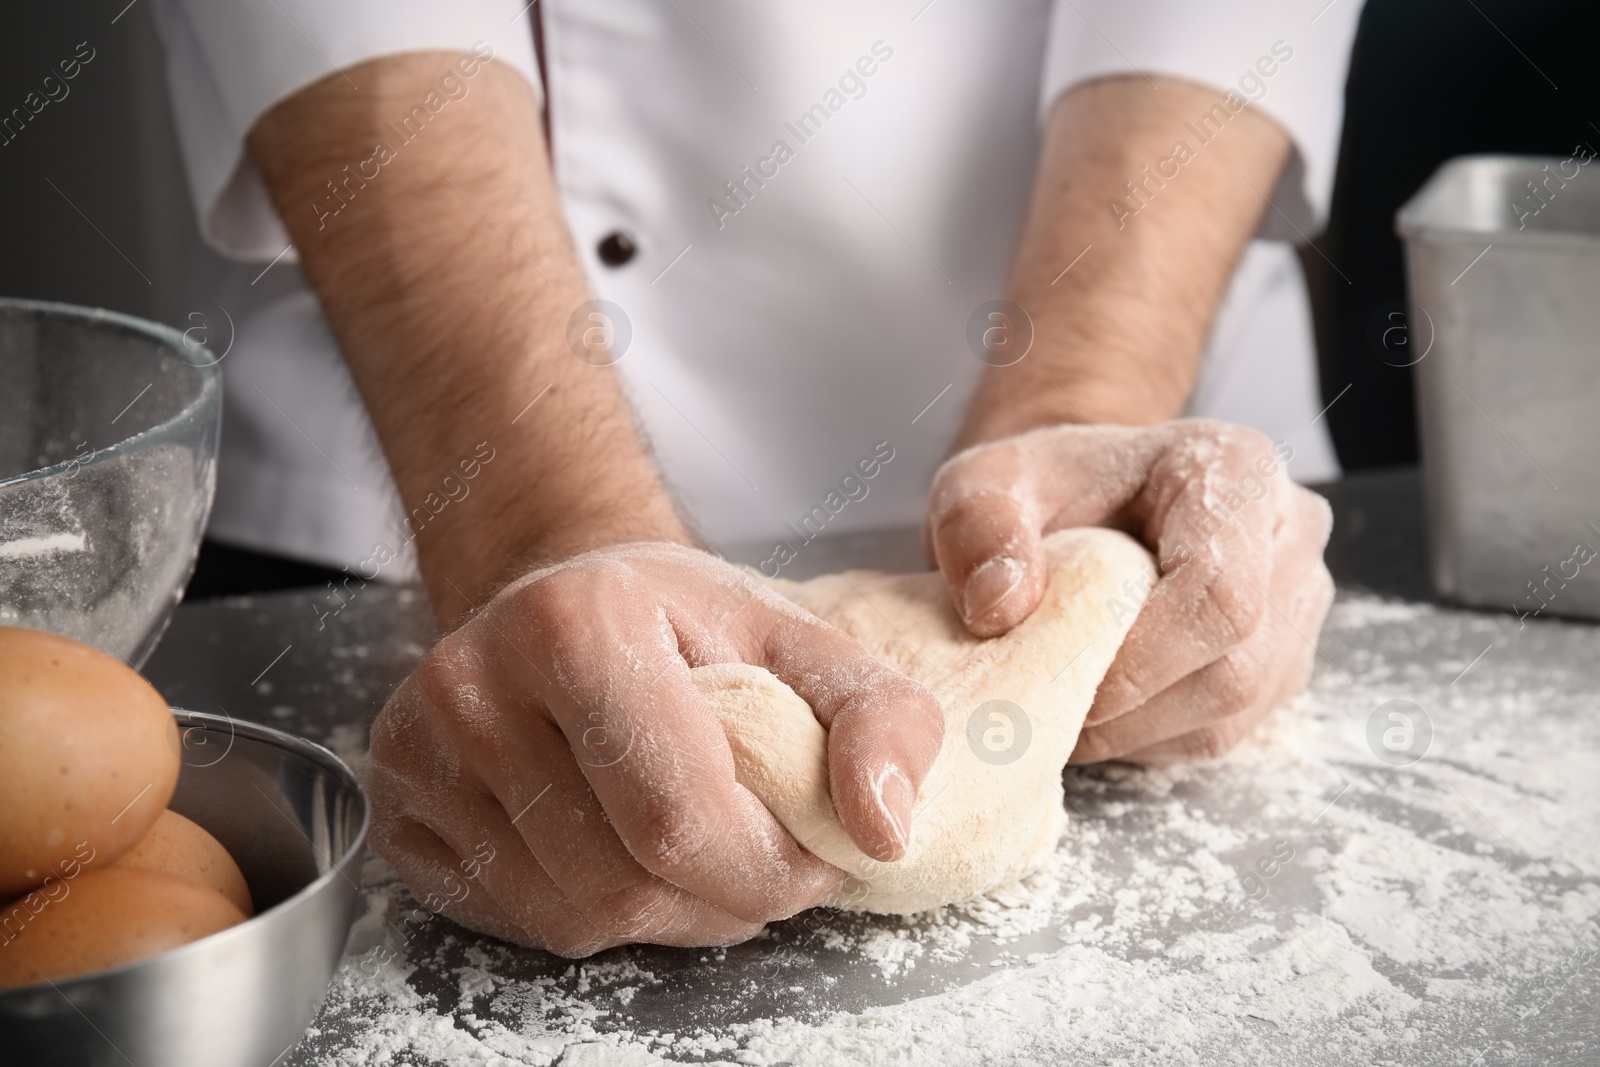 Photo of Man kneading dough for pastry on table